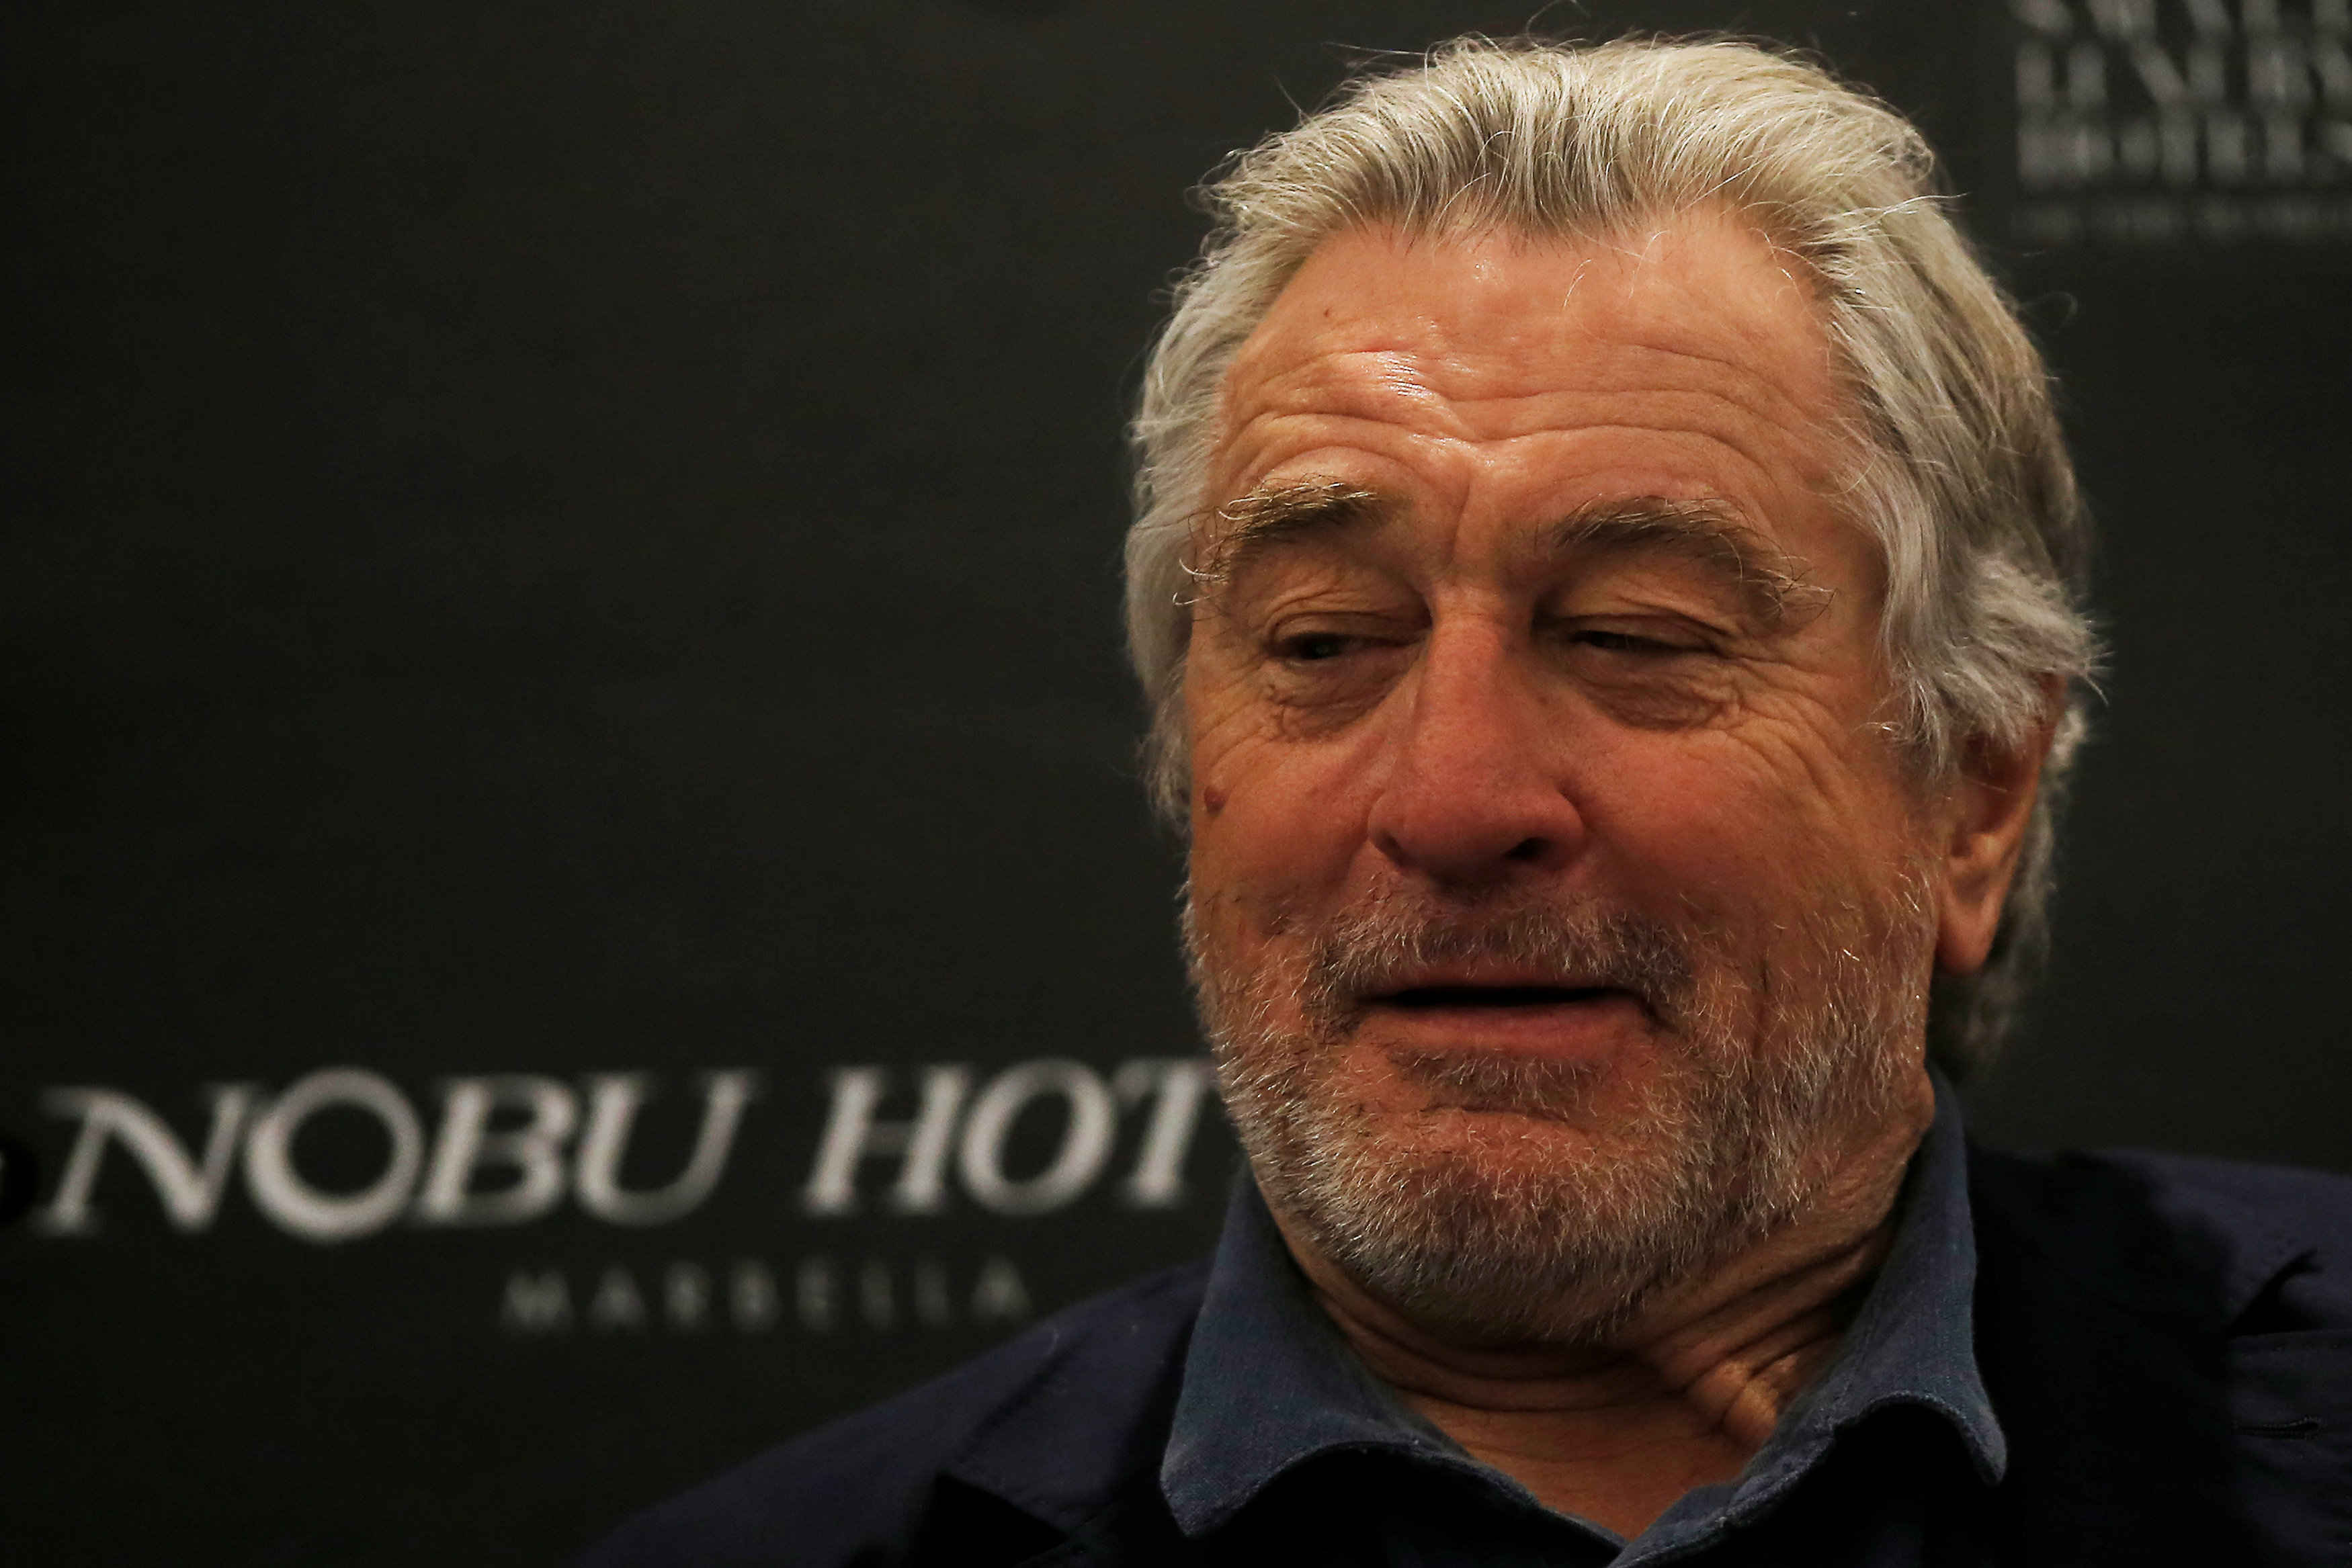 U.S. actor and Nobu co-founder Robert de Niro smiles during a news conference for the inauguration of the new Nobu Hotel in Marbella, southern Spain May 16 (REUTERS)